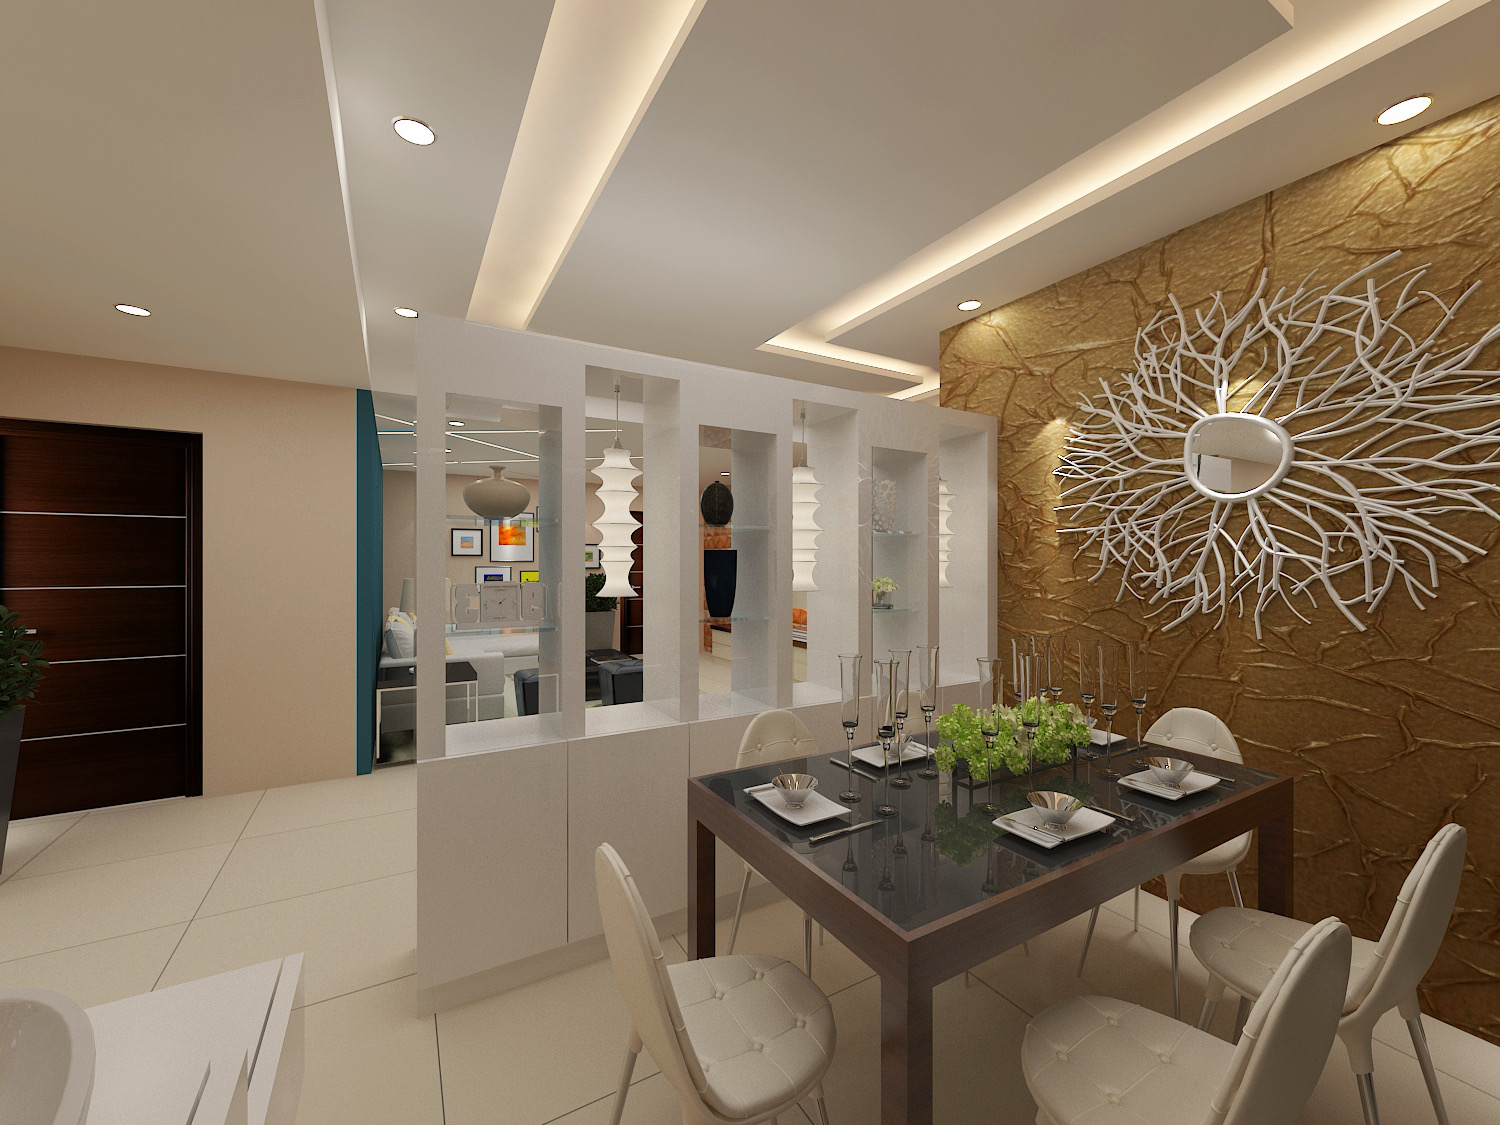 Dining Area Design With Wall Decor